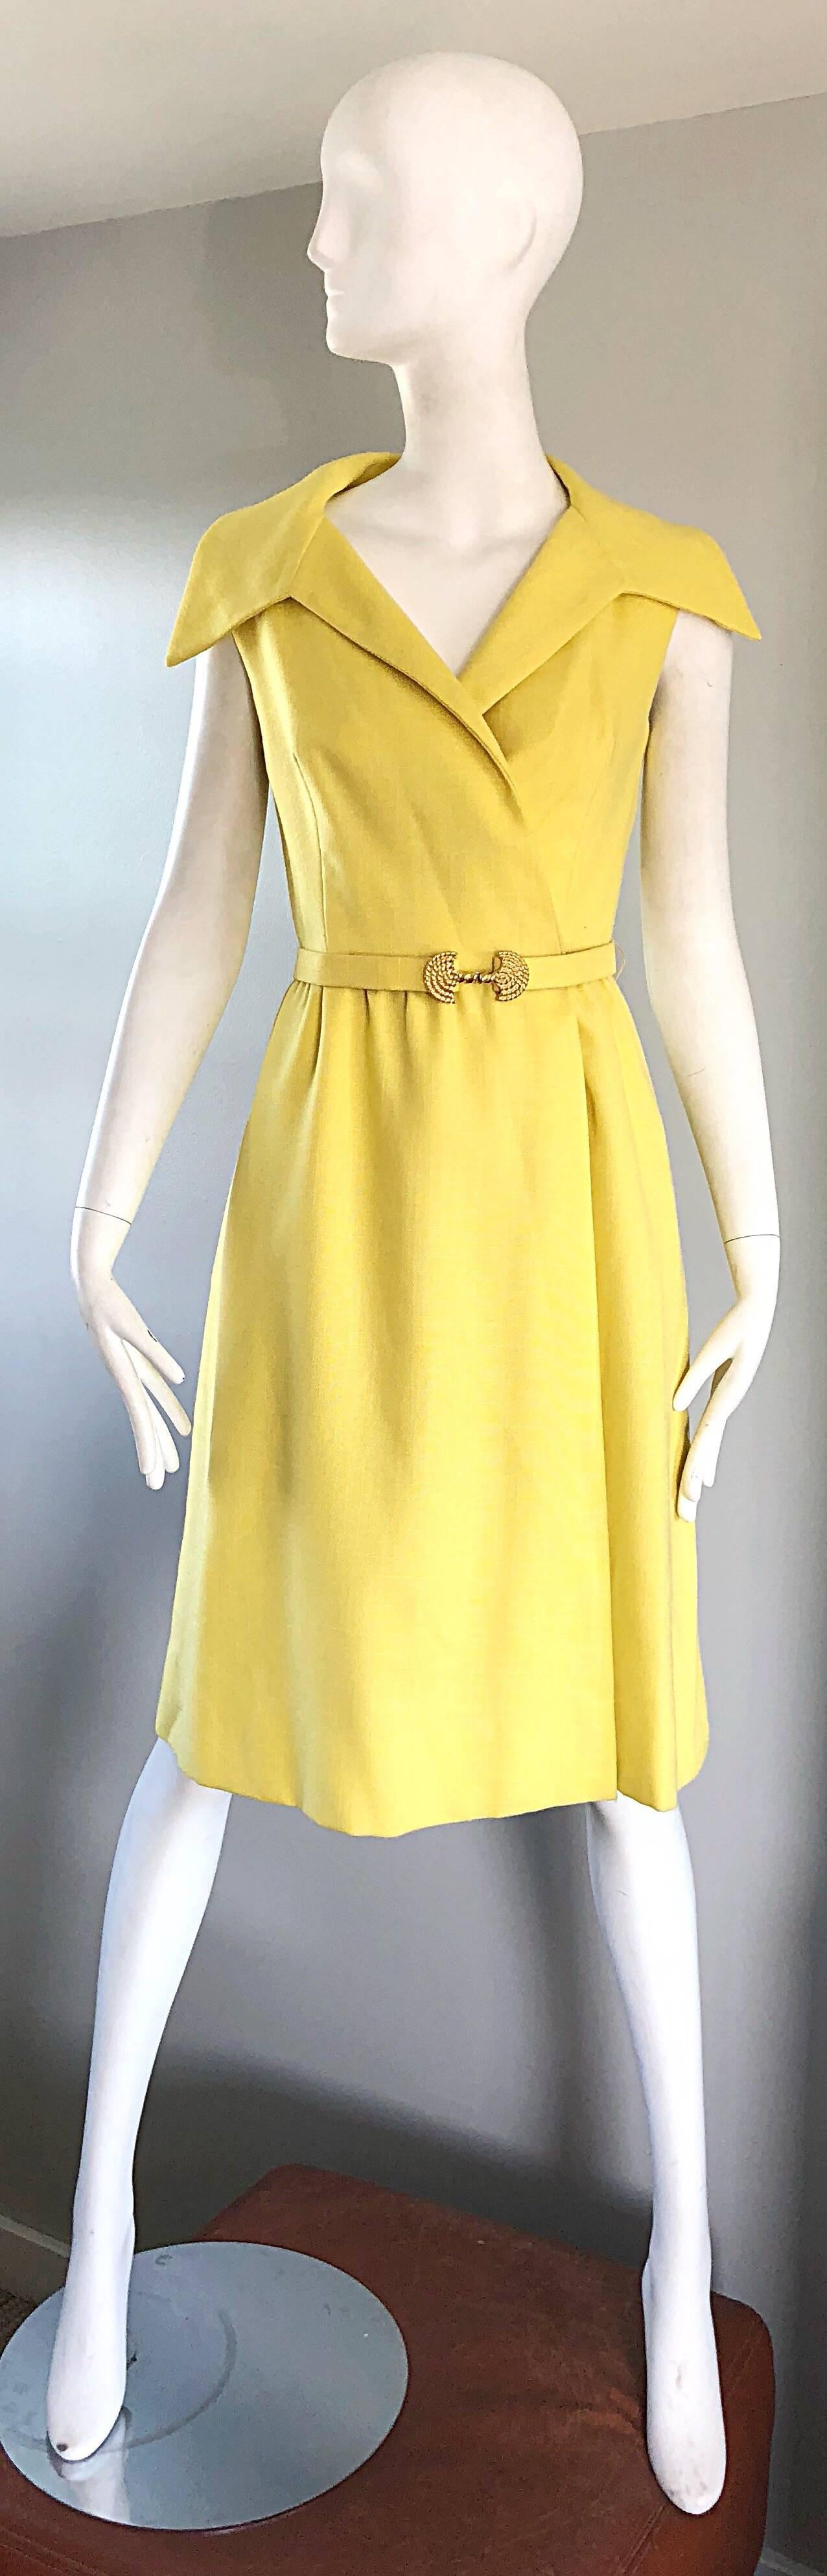 Mollie Parnis Canary Yellow Linen Vintage Belted Shirt Dress, 1950s  4